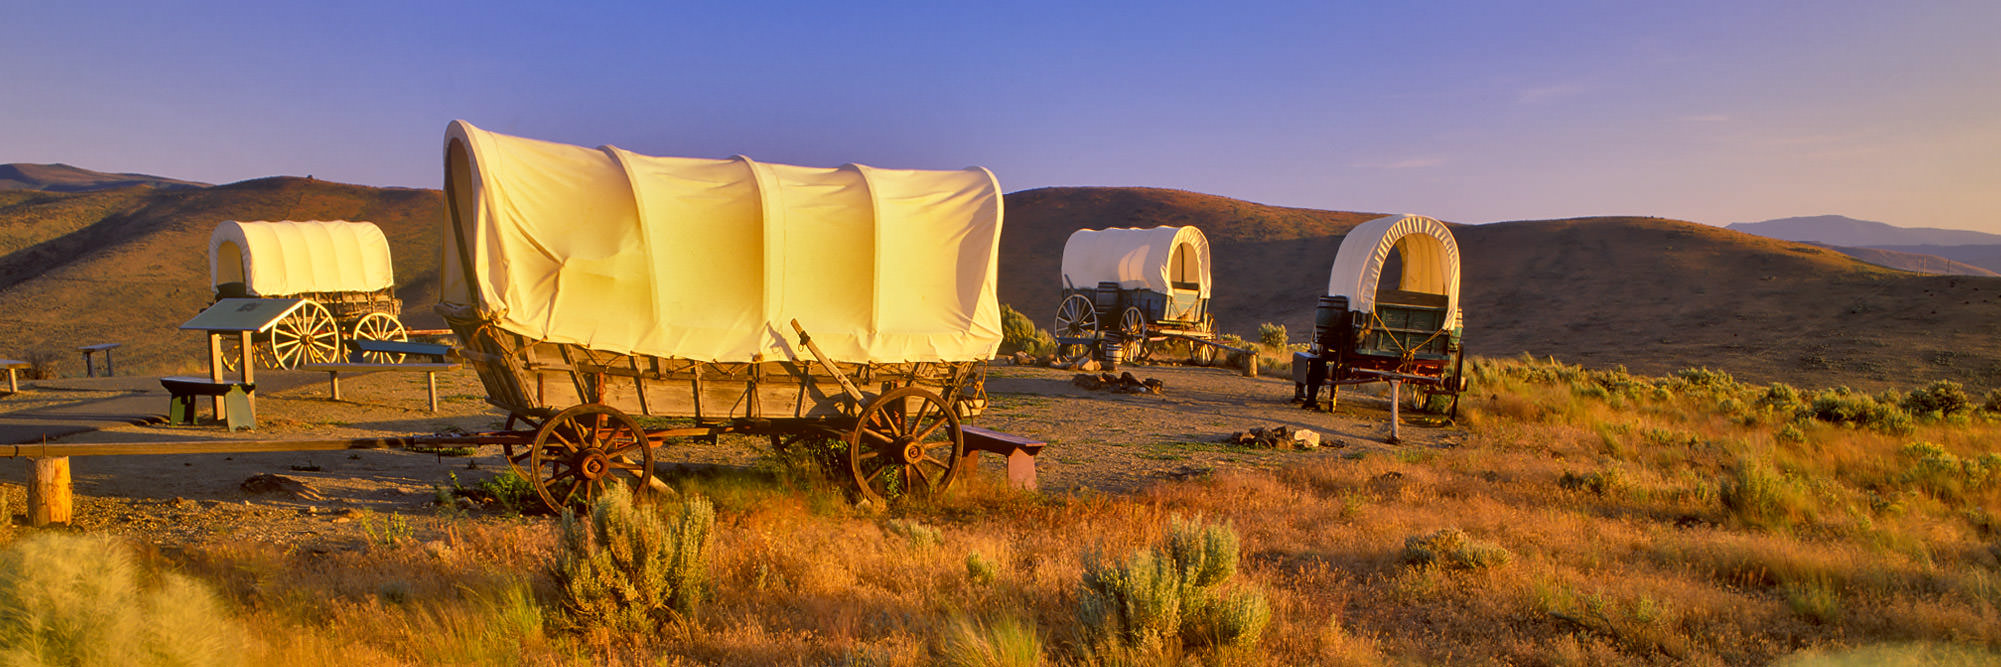 The True Story of the Oregon Trail - Travel Oregon